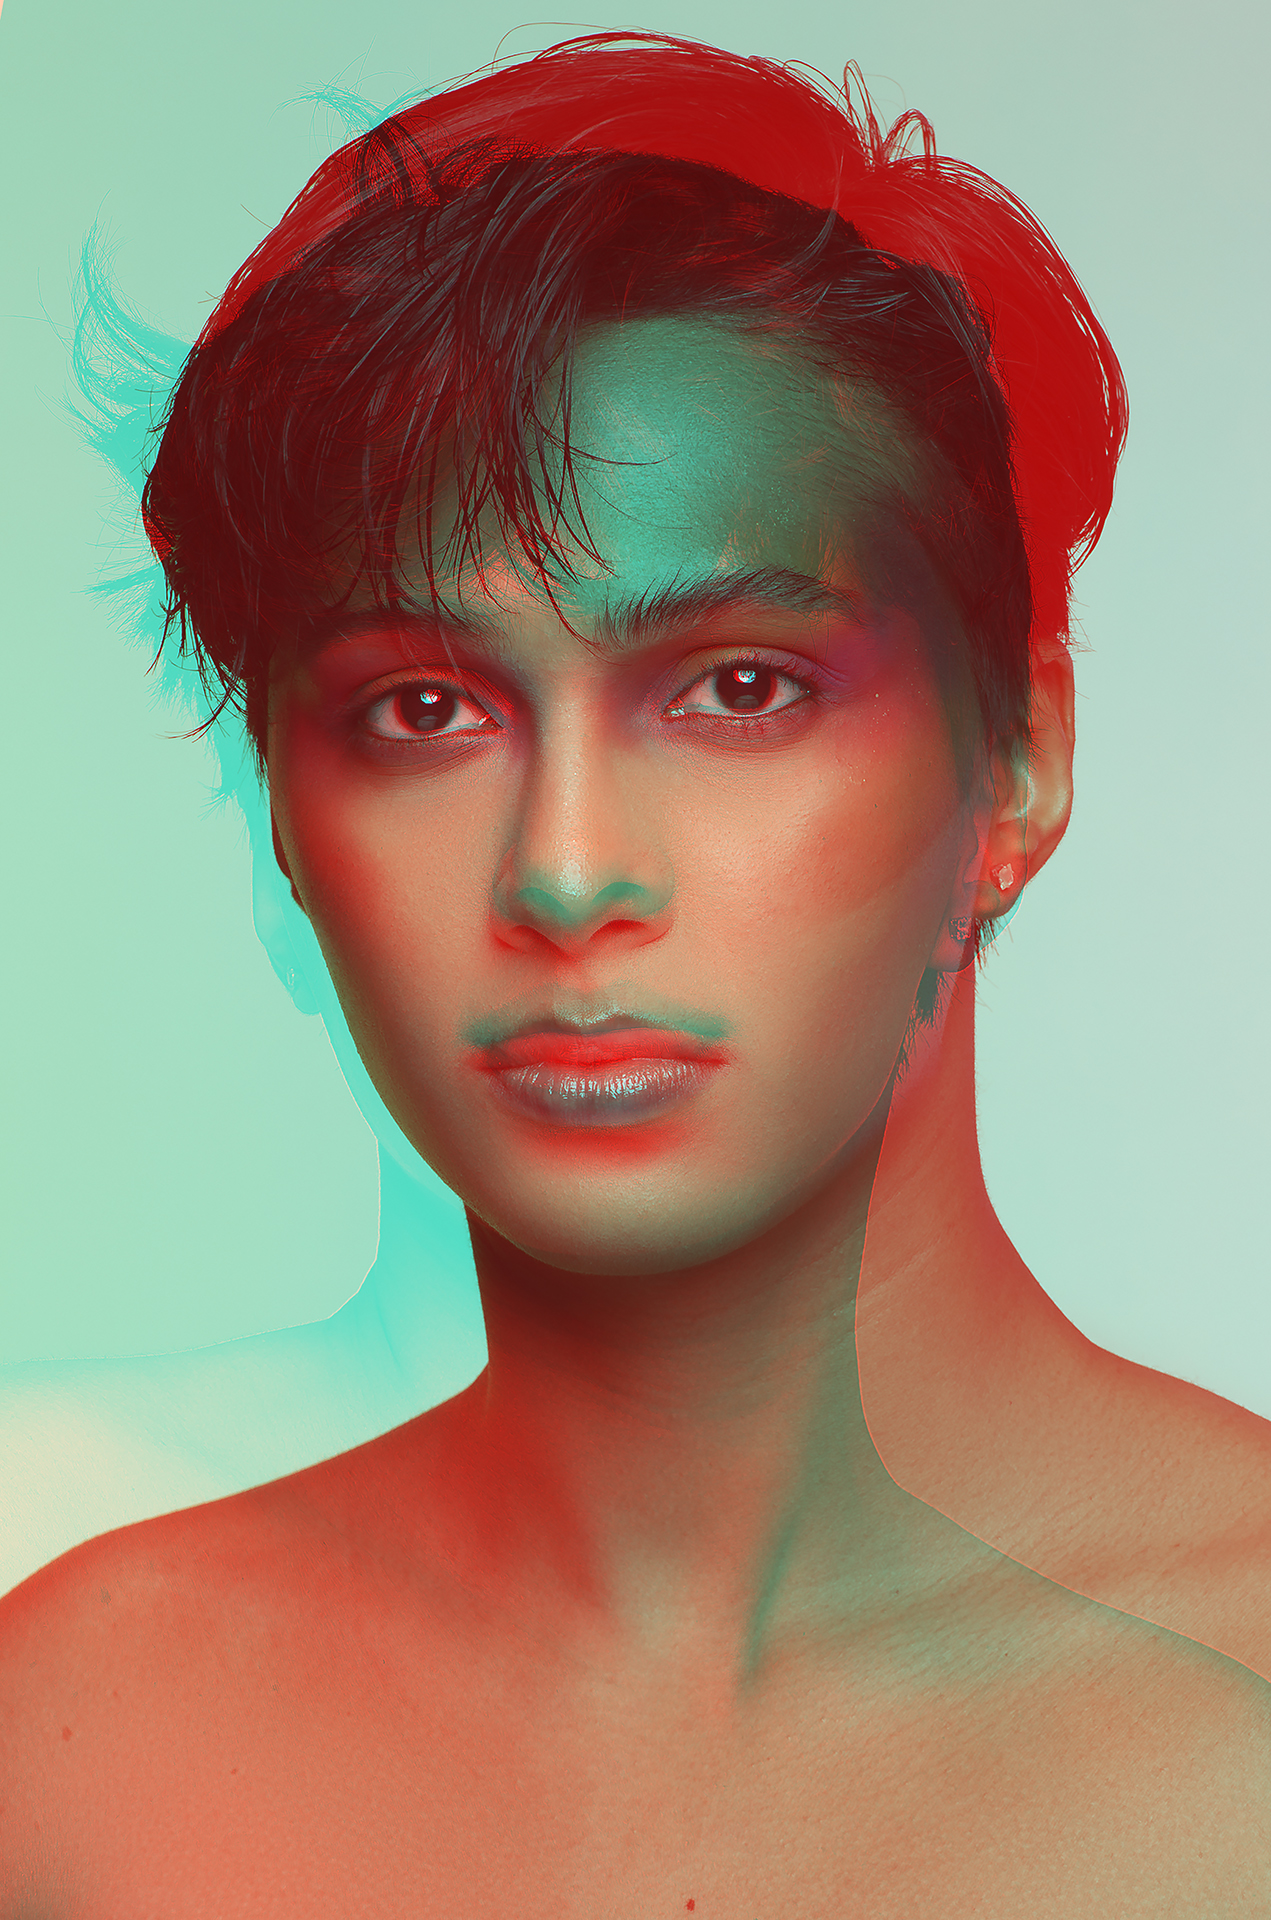 Two headshot portraits of the same girl stacked on top of each other to create a double exposure. One portrait is red and the other is cyan. The eyes are aligned, the model has short hair and her collarbones are exposed.